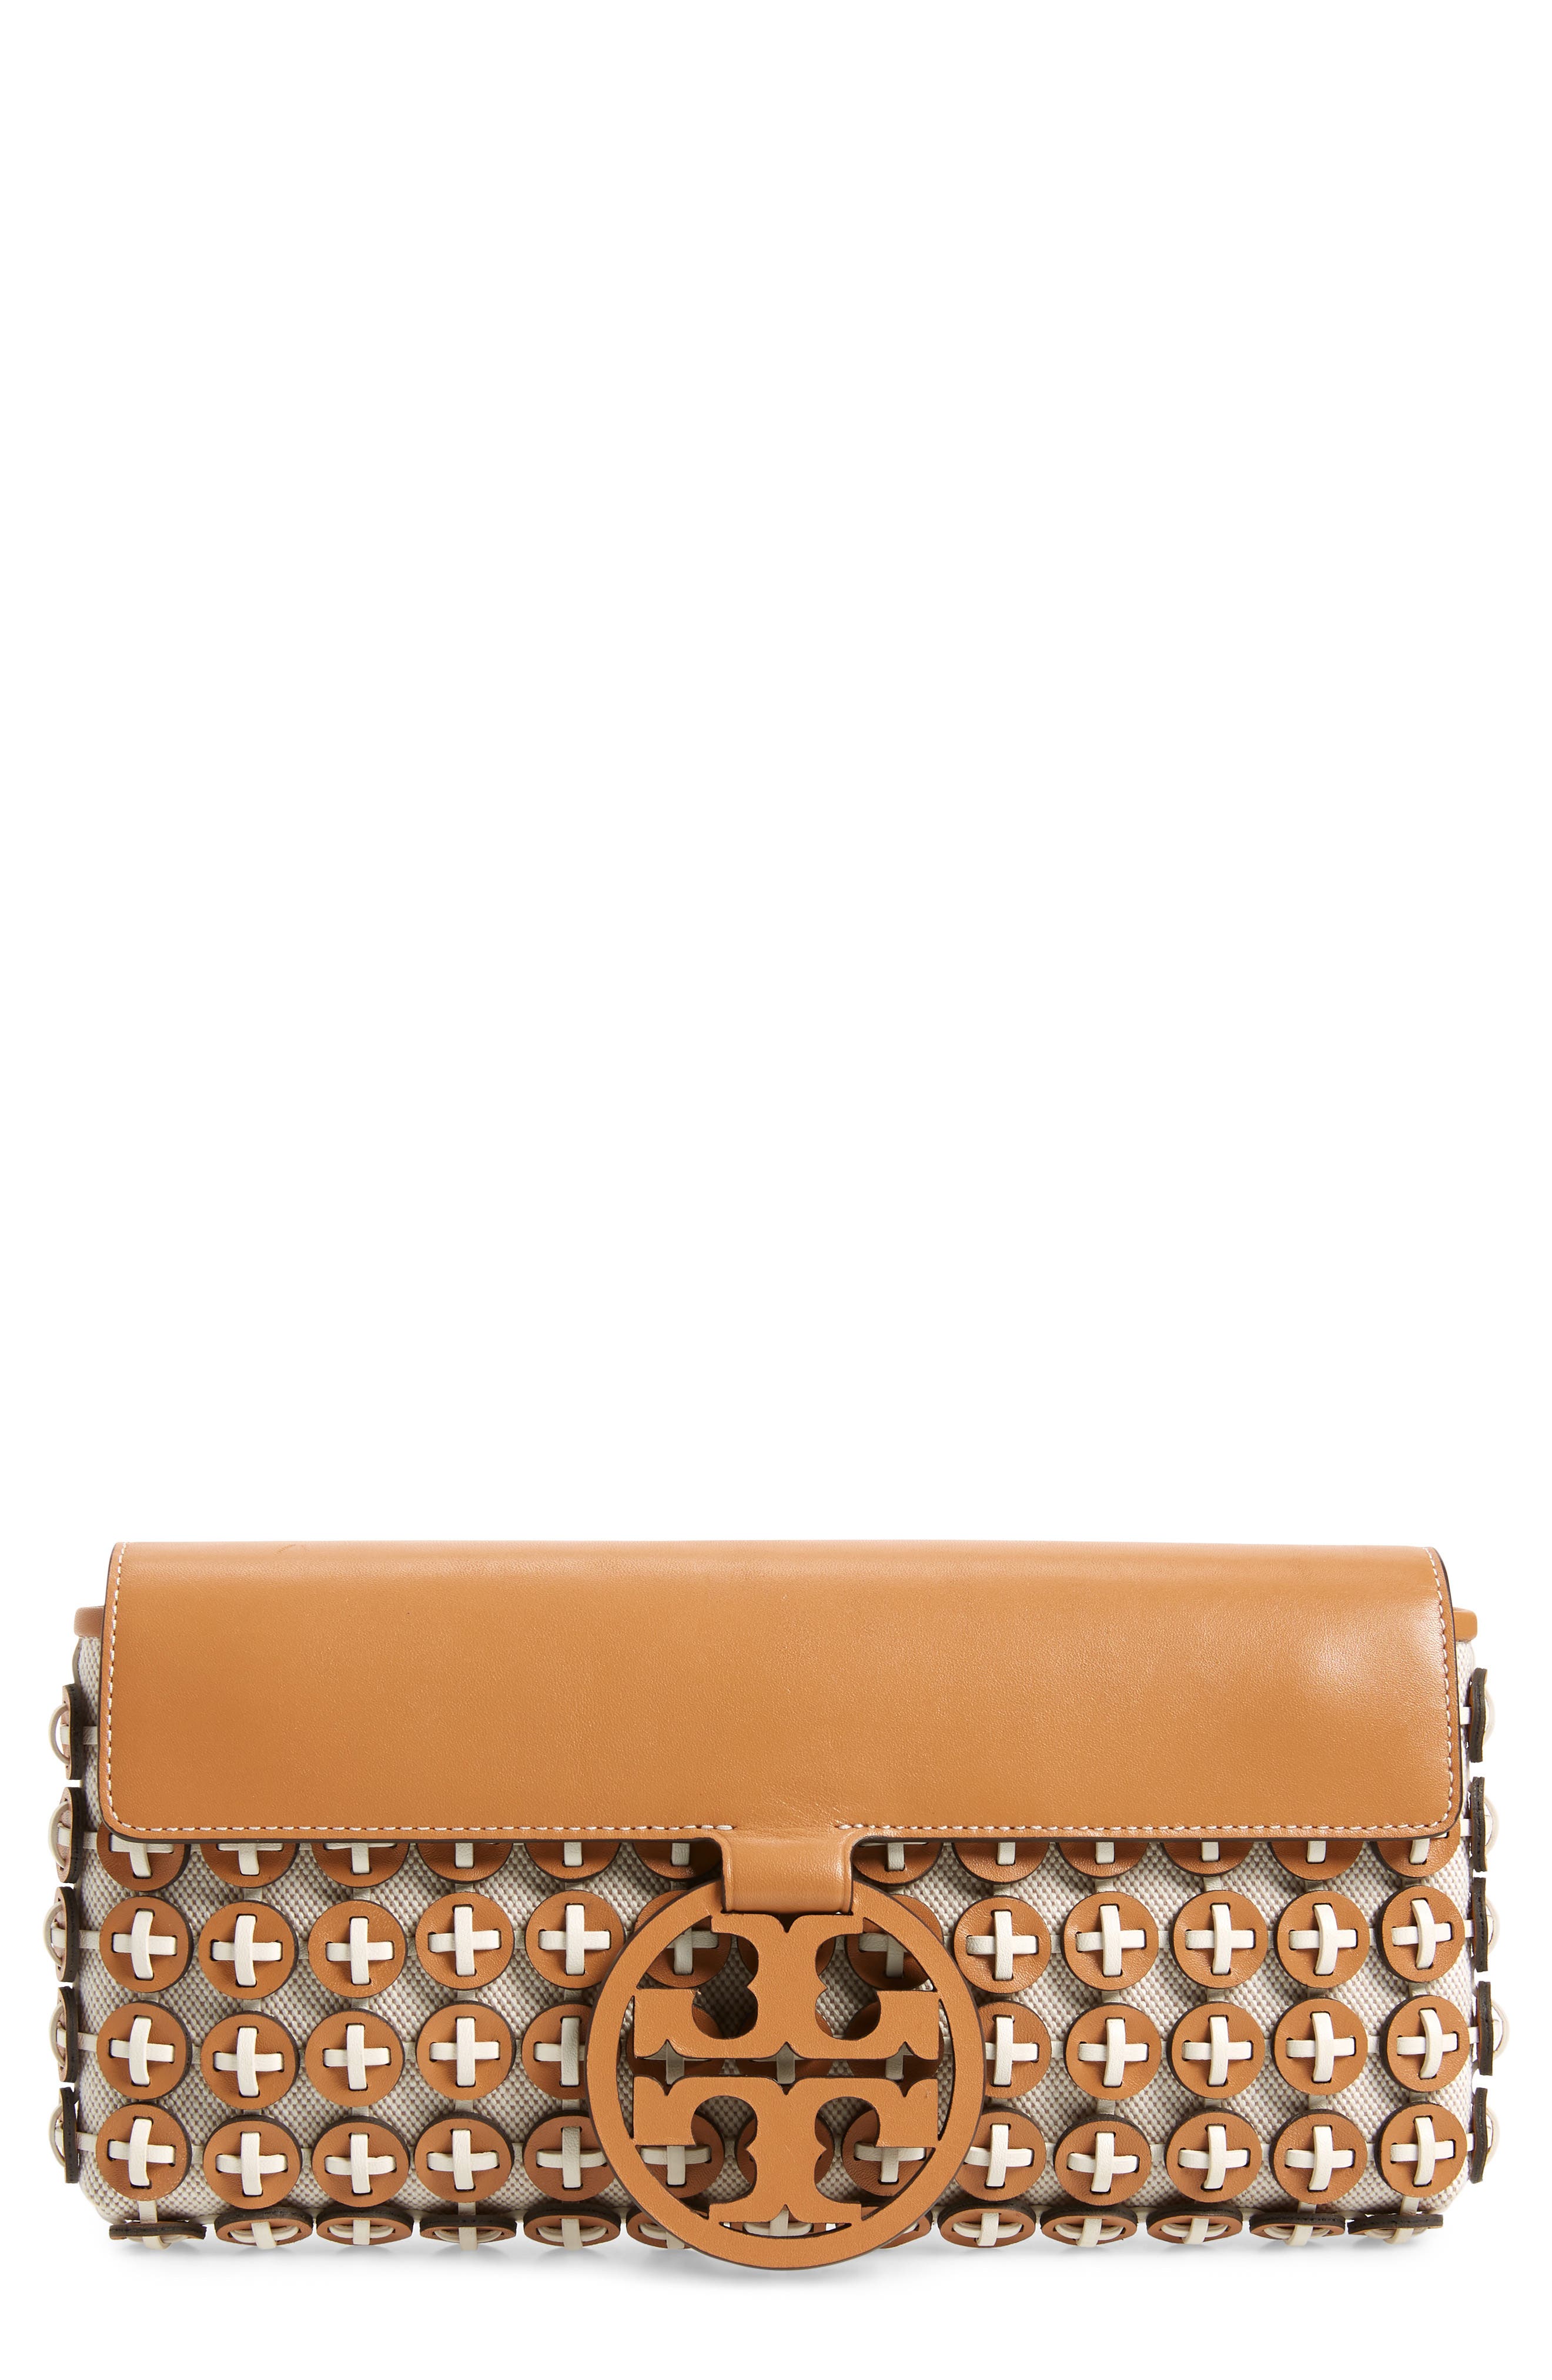 Tory Burch Miller Leather Chainmail 